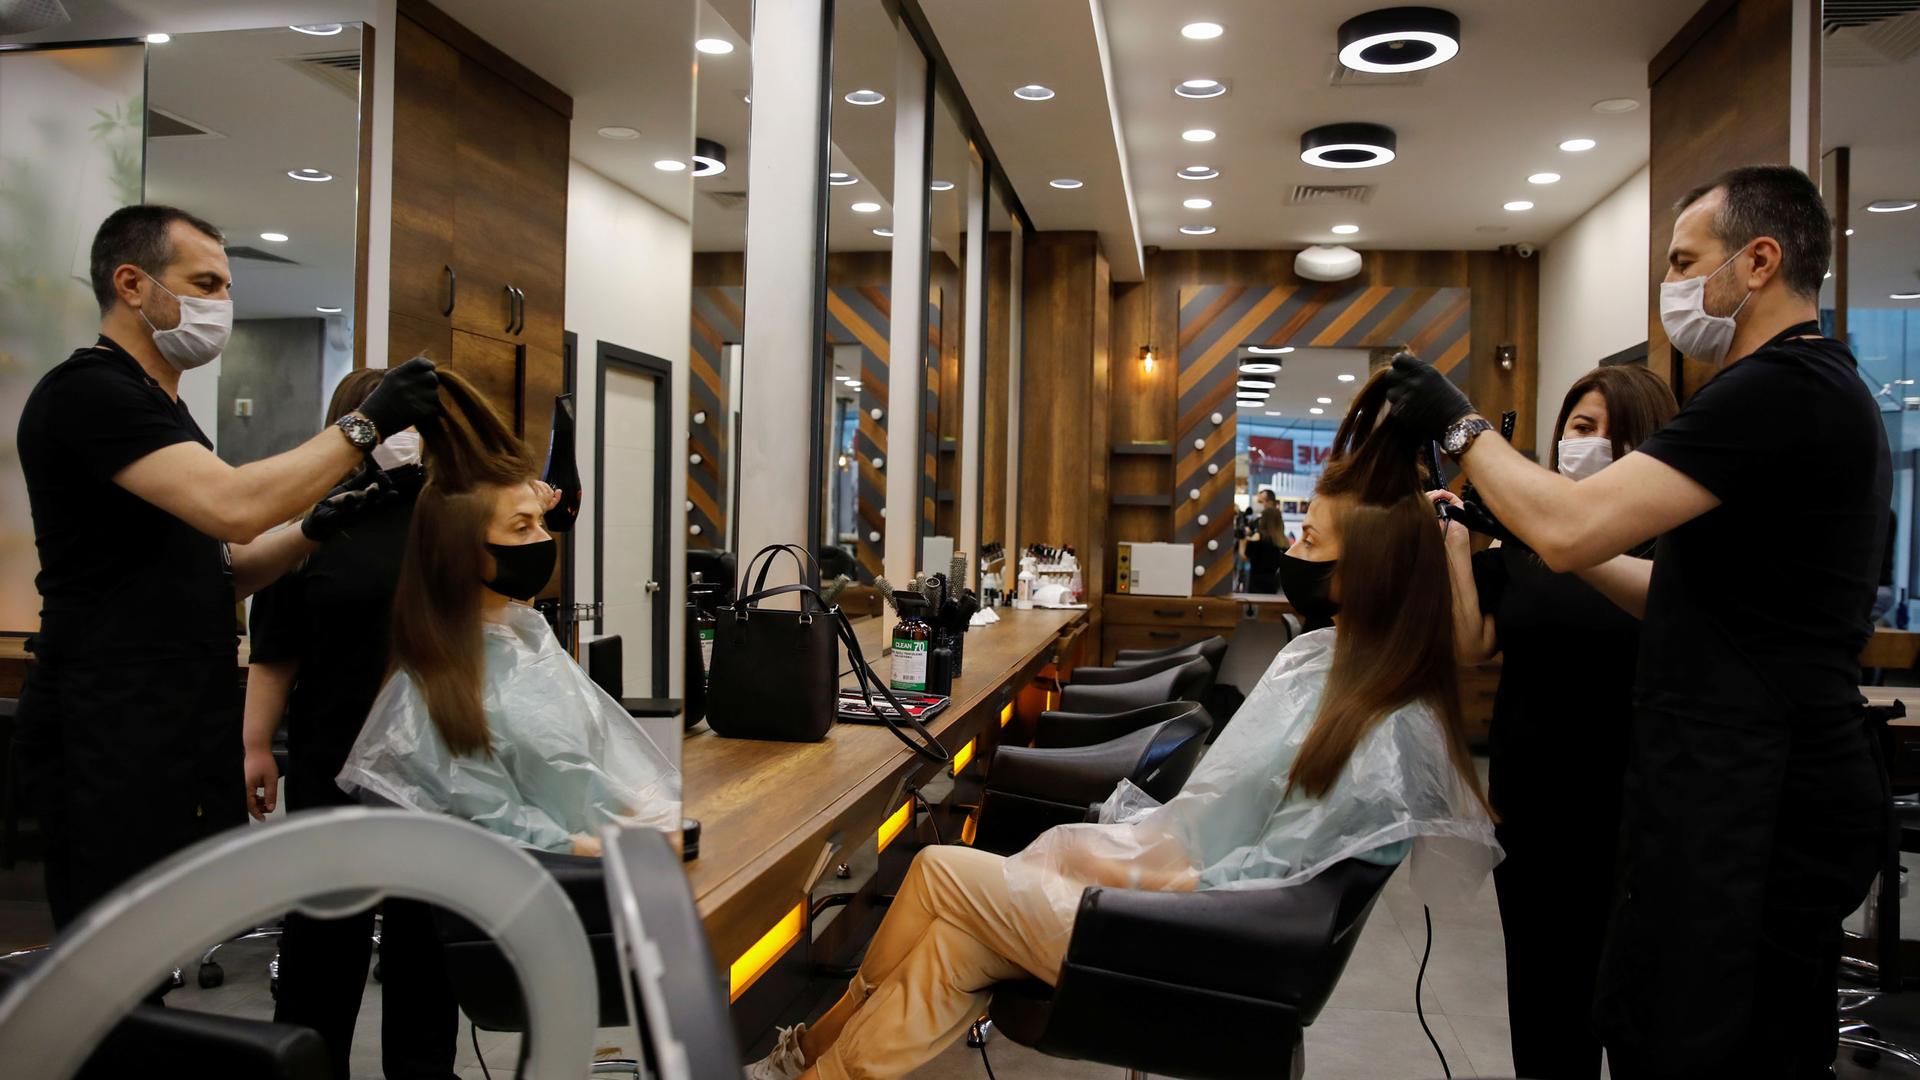 A hairdresser is shown standing behind a customer who is sitting in a chair while he holds her hair up in the air.